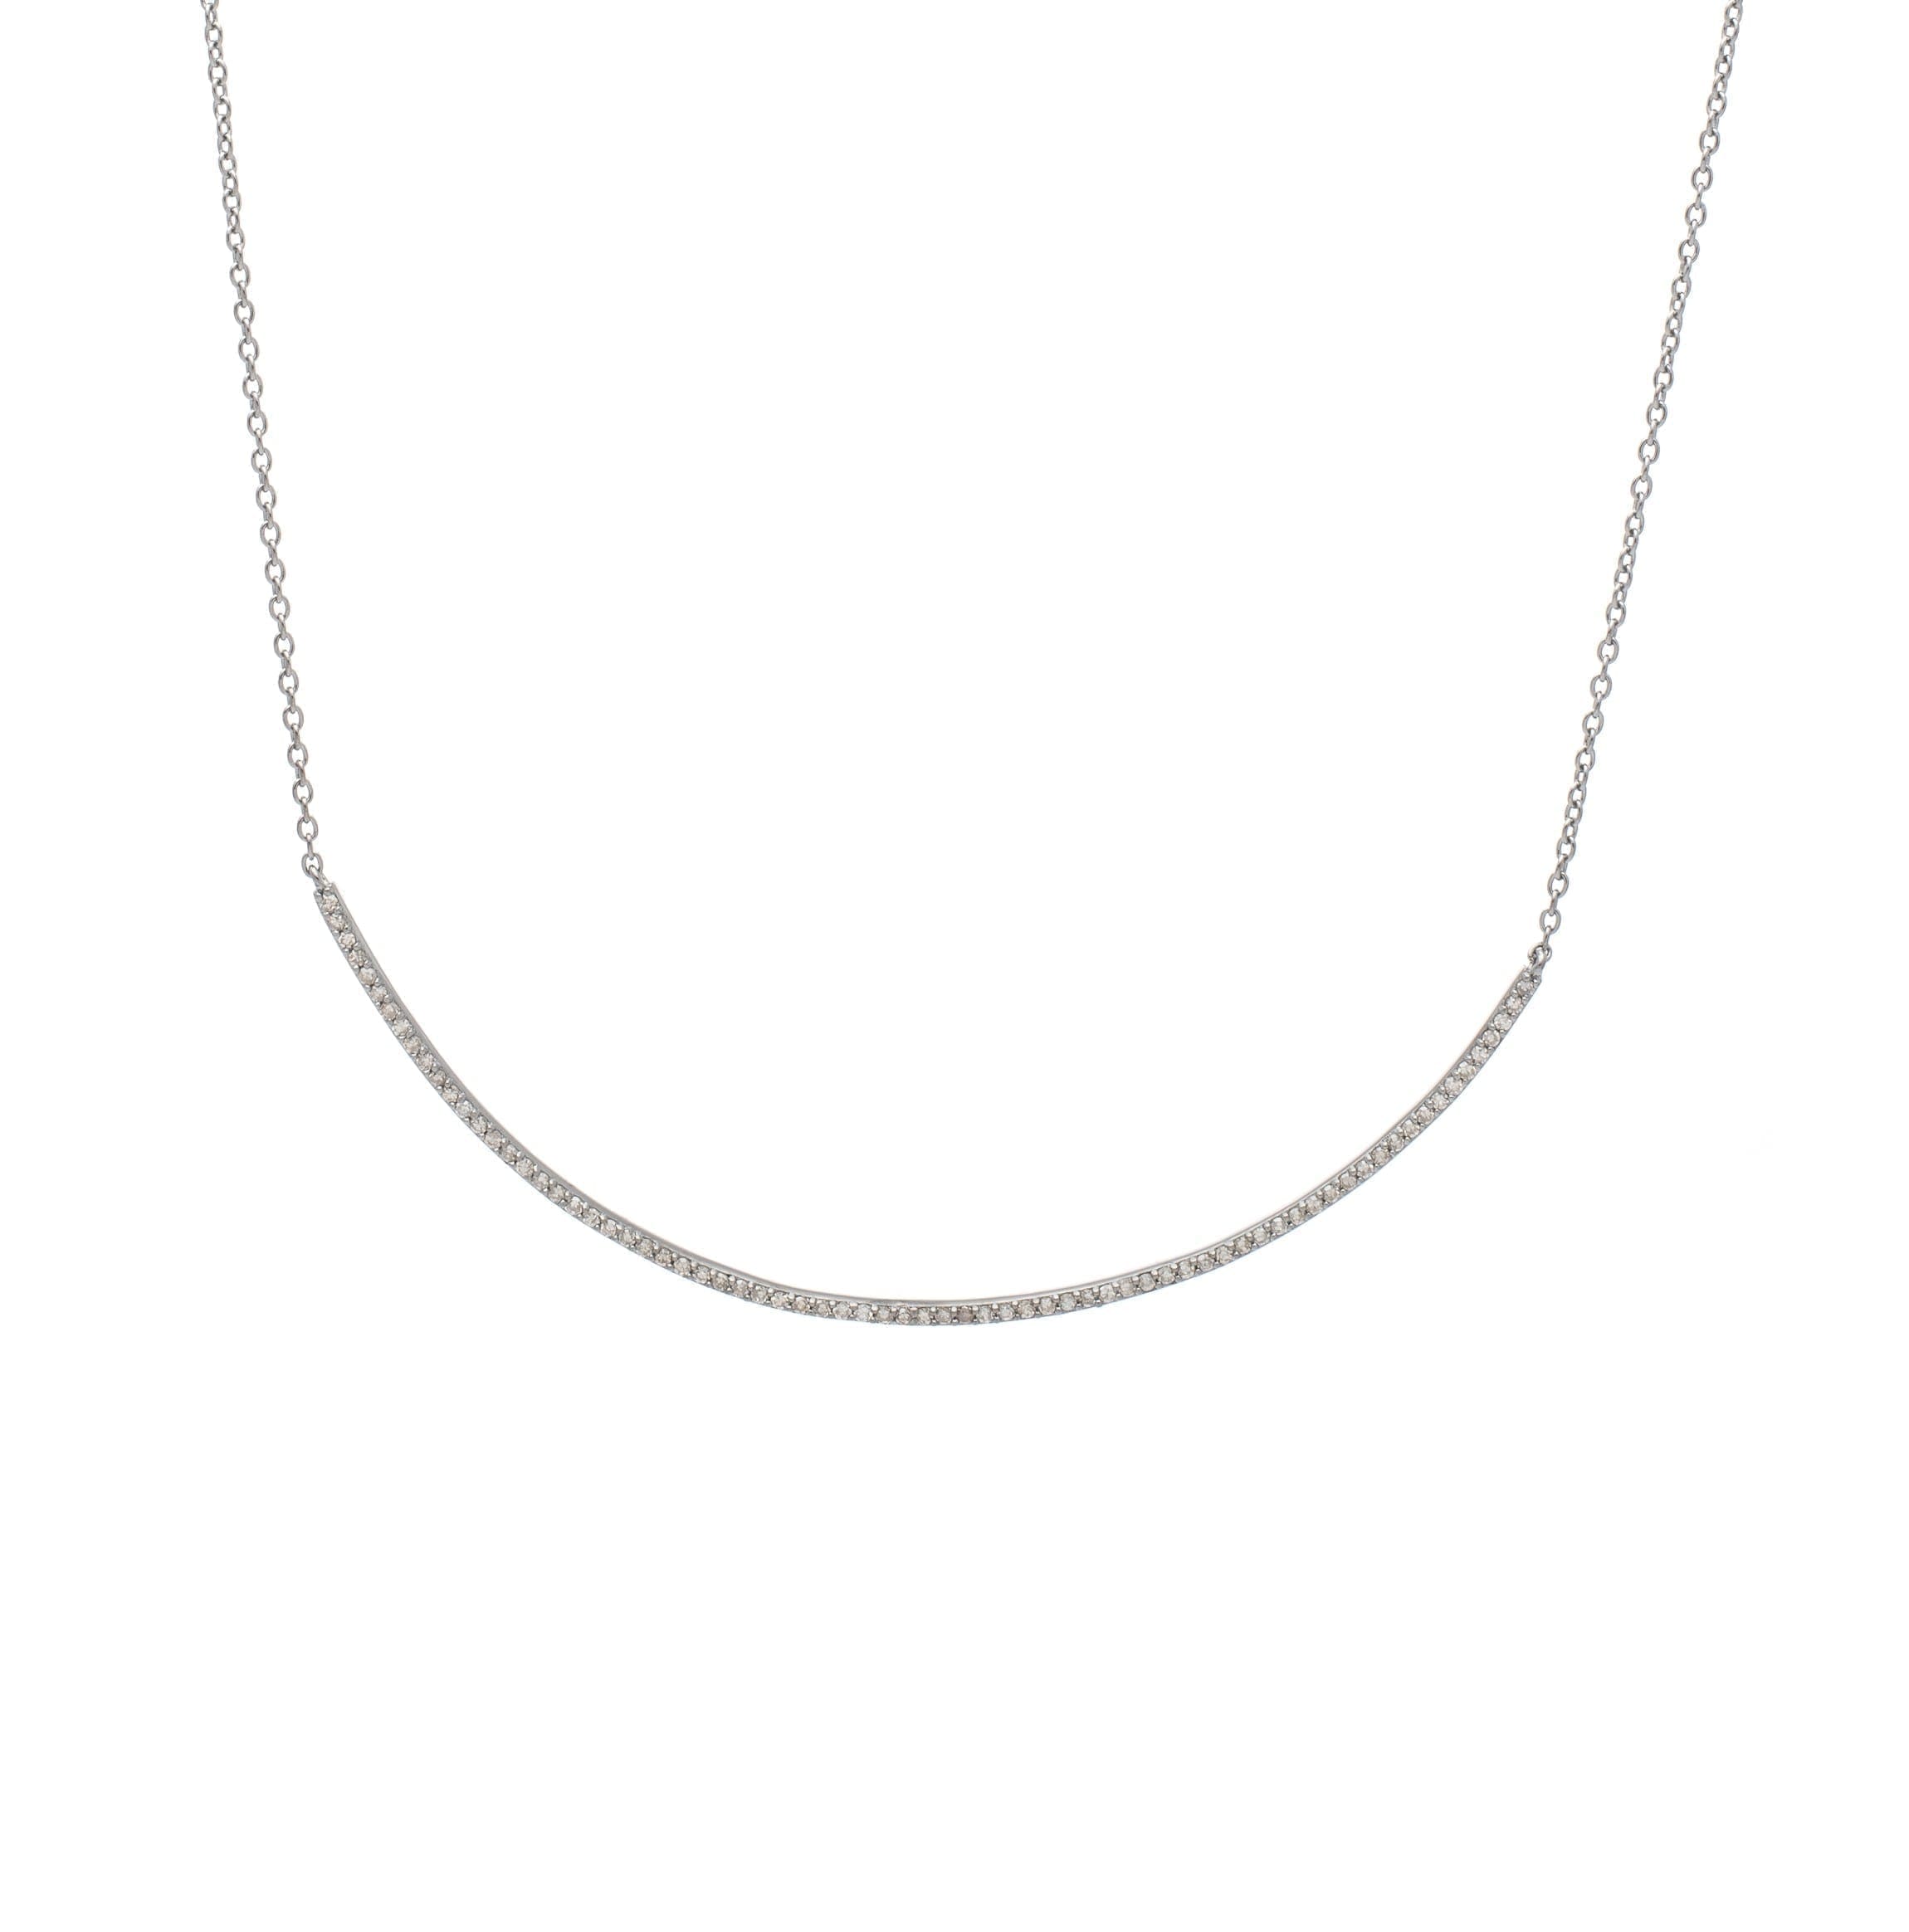 Diamond Curved Bar Necklace | BE LOVED Jewelry